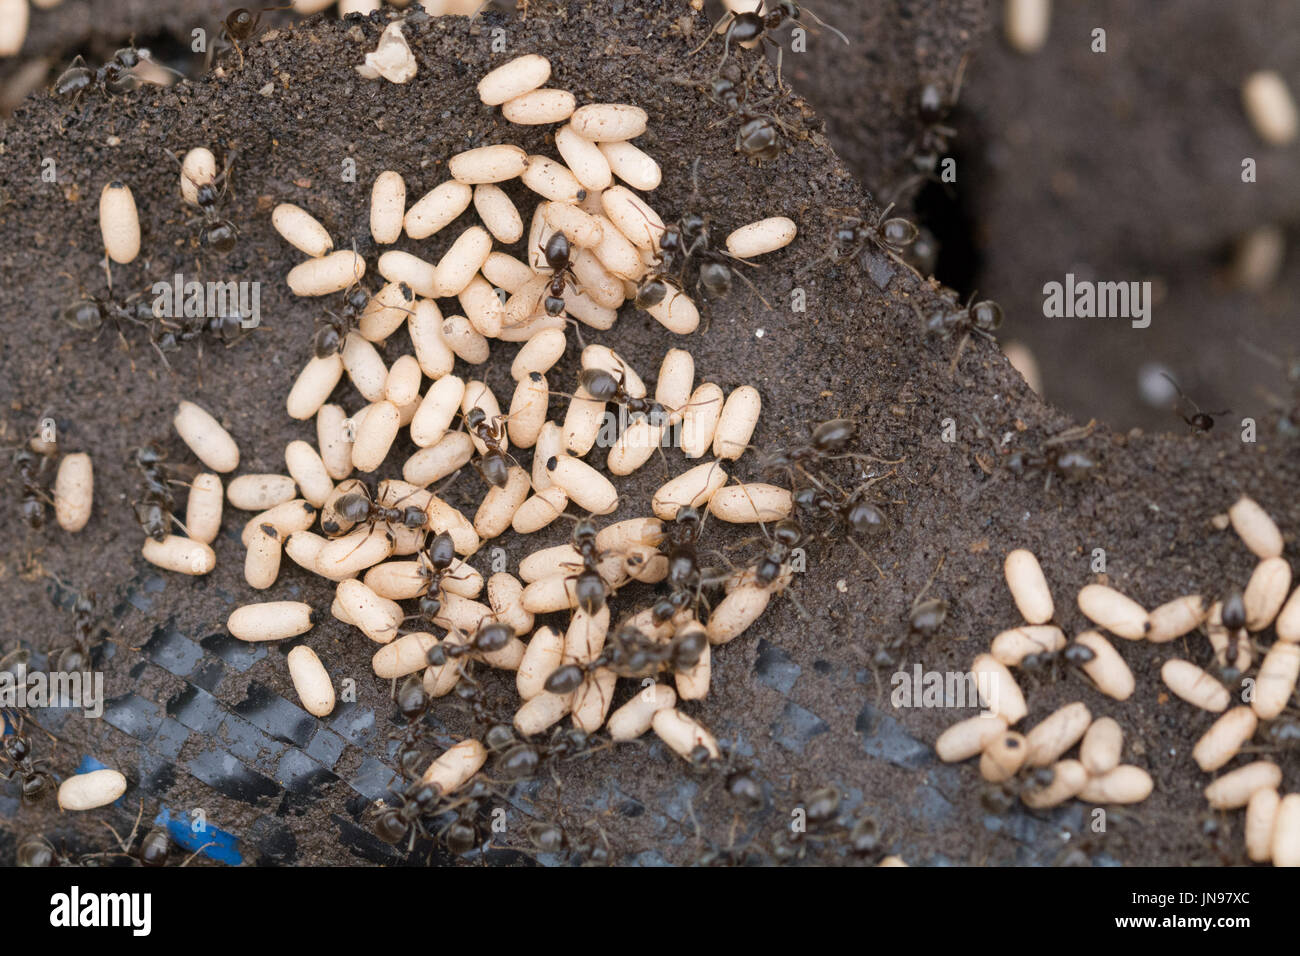 Ants moving ant eggs Stock Photo